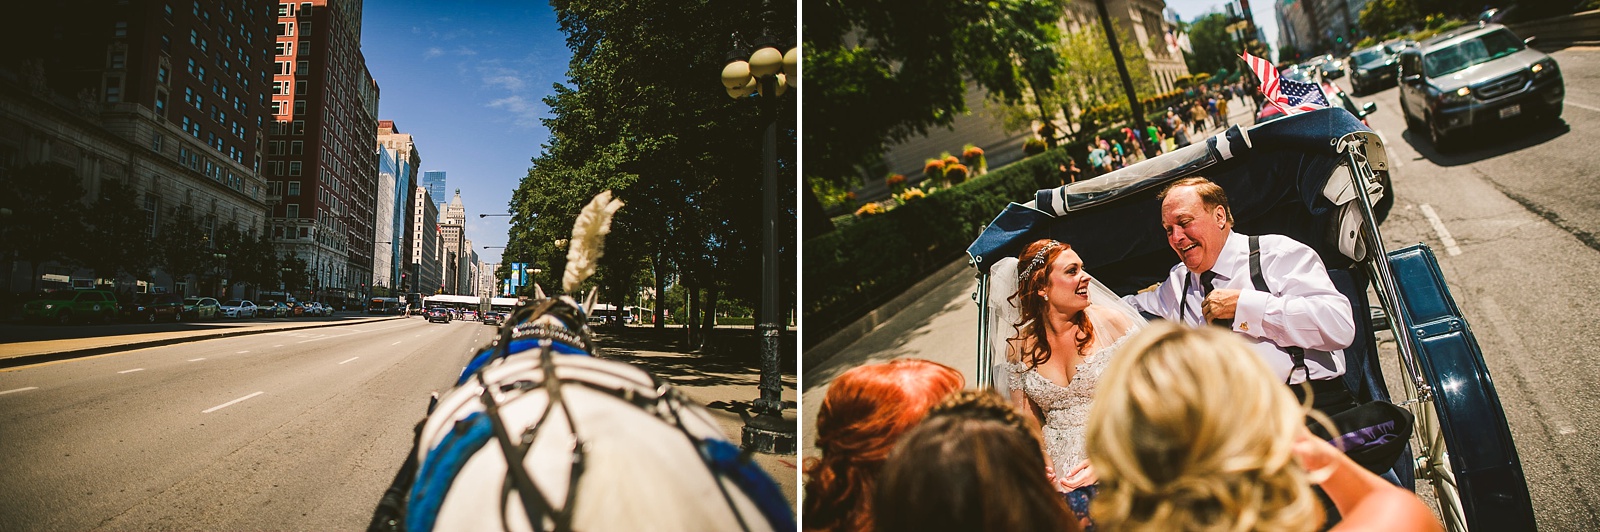 23 in the horse drawn carriage - Hilton Chicago Wedding Photographer // Sarah + Aaron